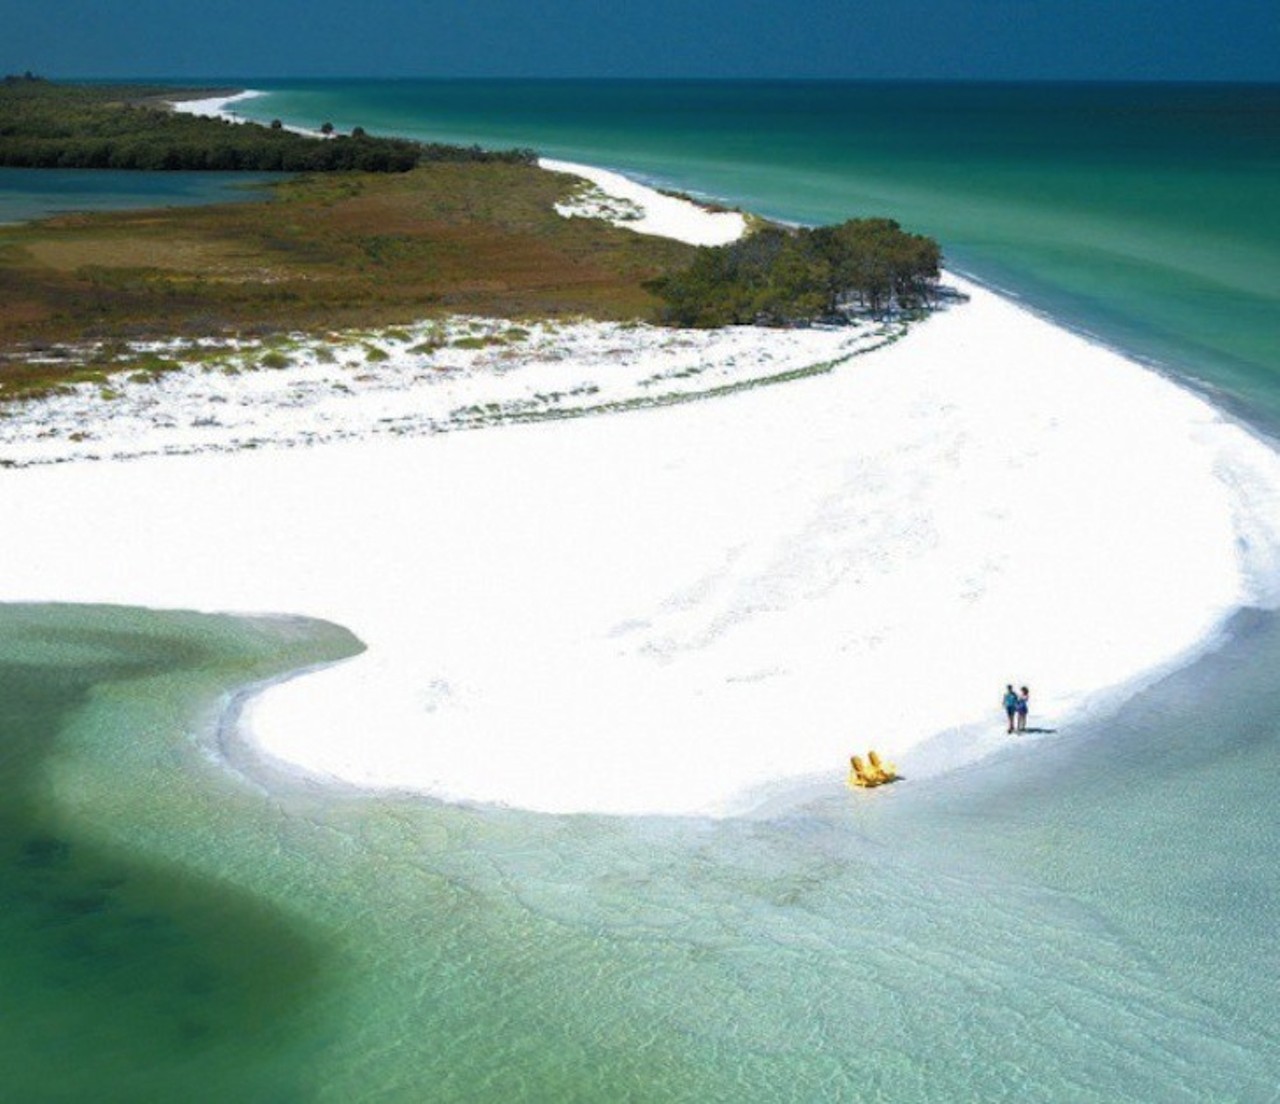 Caladesi Island State Park
When you can only get somewhere by boat... well, let's just say you'll have a lot brag about when you get home. You can have one of the best shelling experiences of your life or just drag a lounge chair to the warm waters for a relaxing afternoon. Either way you'll be left alone at Caladesi.
2 hours and 24 minutes
Photo via fbayfinservices/Instagram